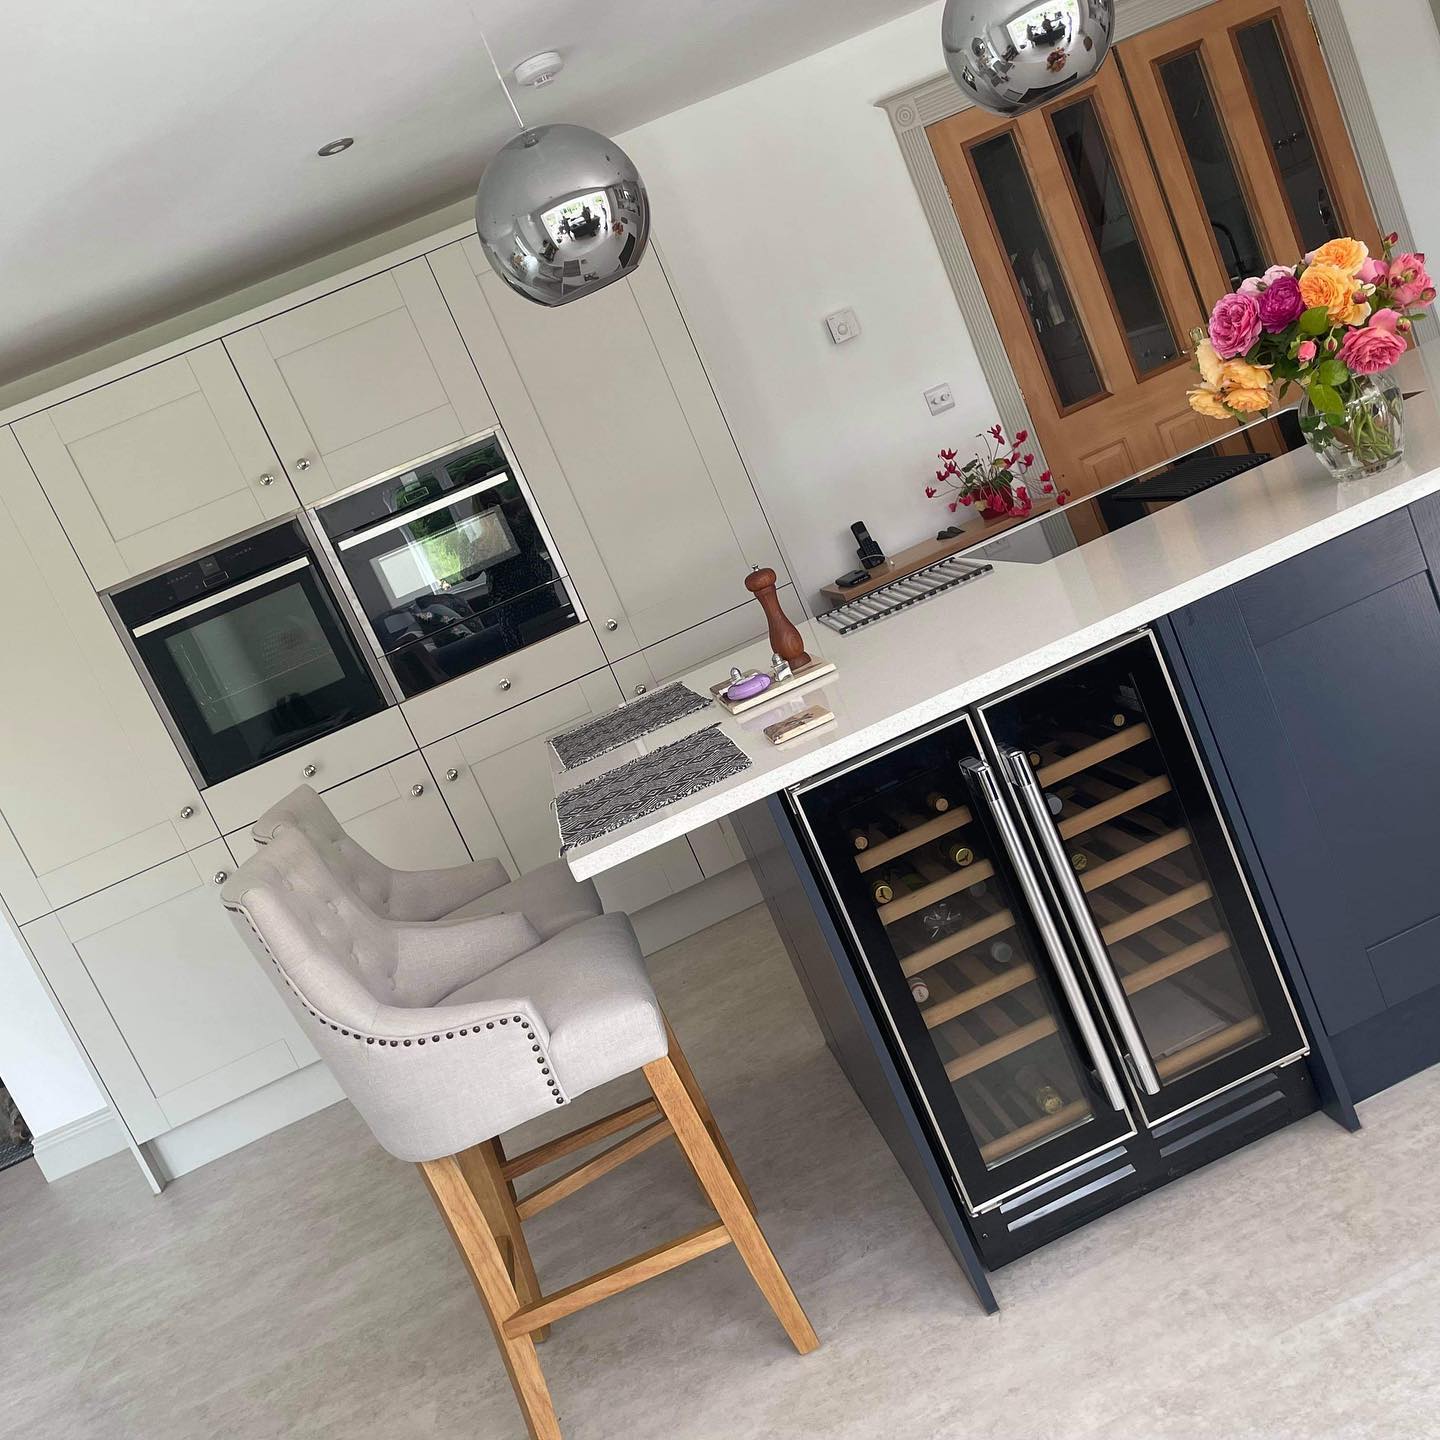 Two tone blue and white kitchen in shaker style with breakfast bar and integrated wine cooler, plus double NEFF ovens at comfort height